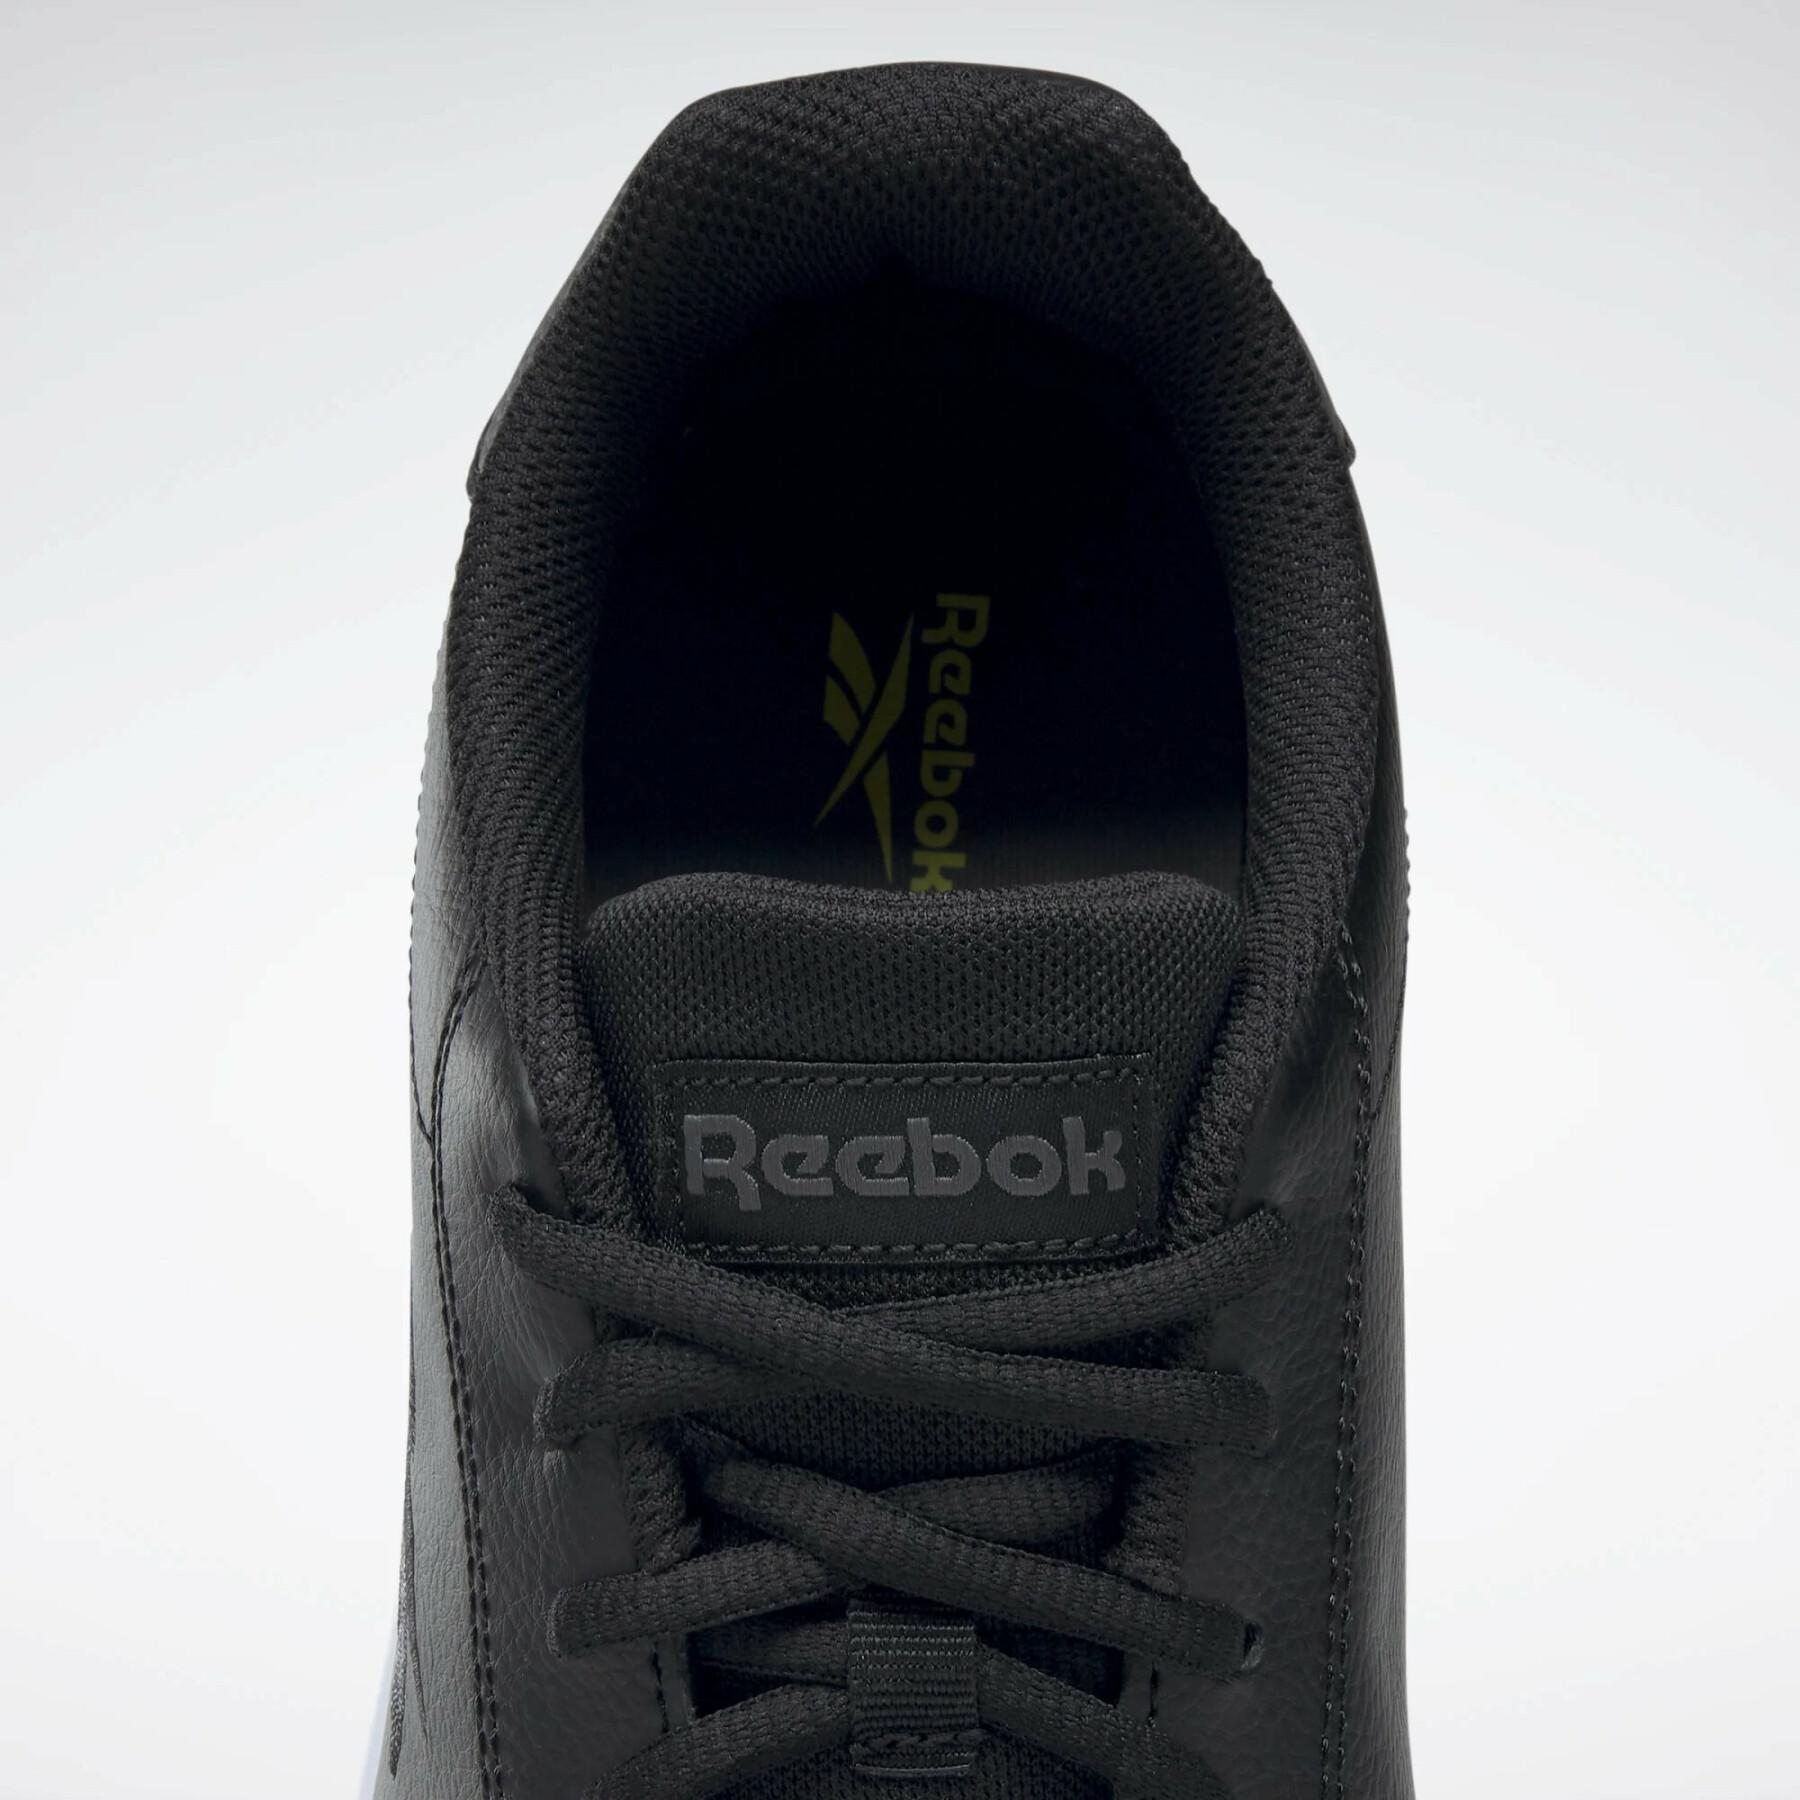 Chaussures Reebok Royal Complete Sport